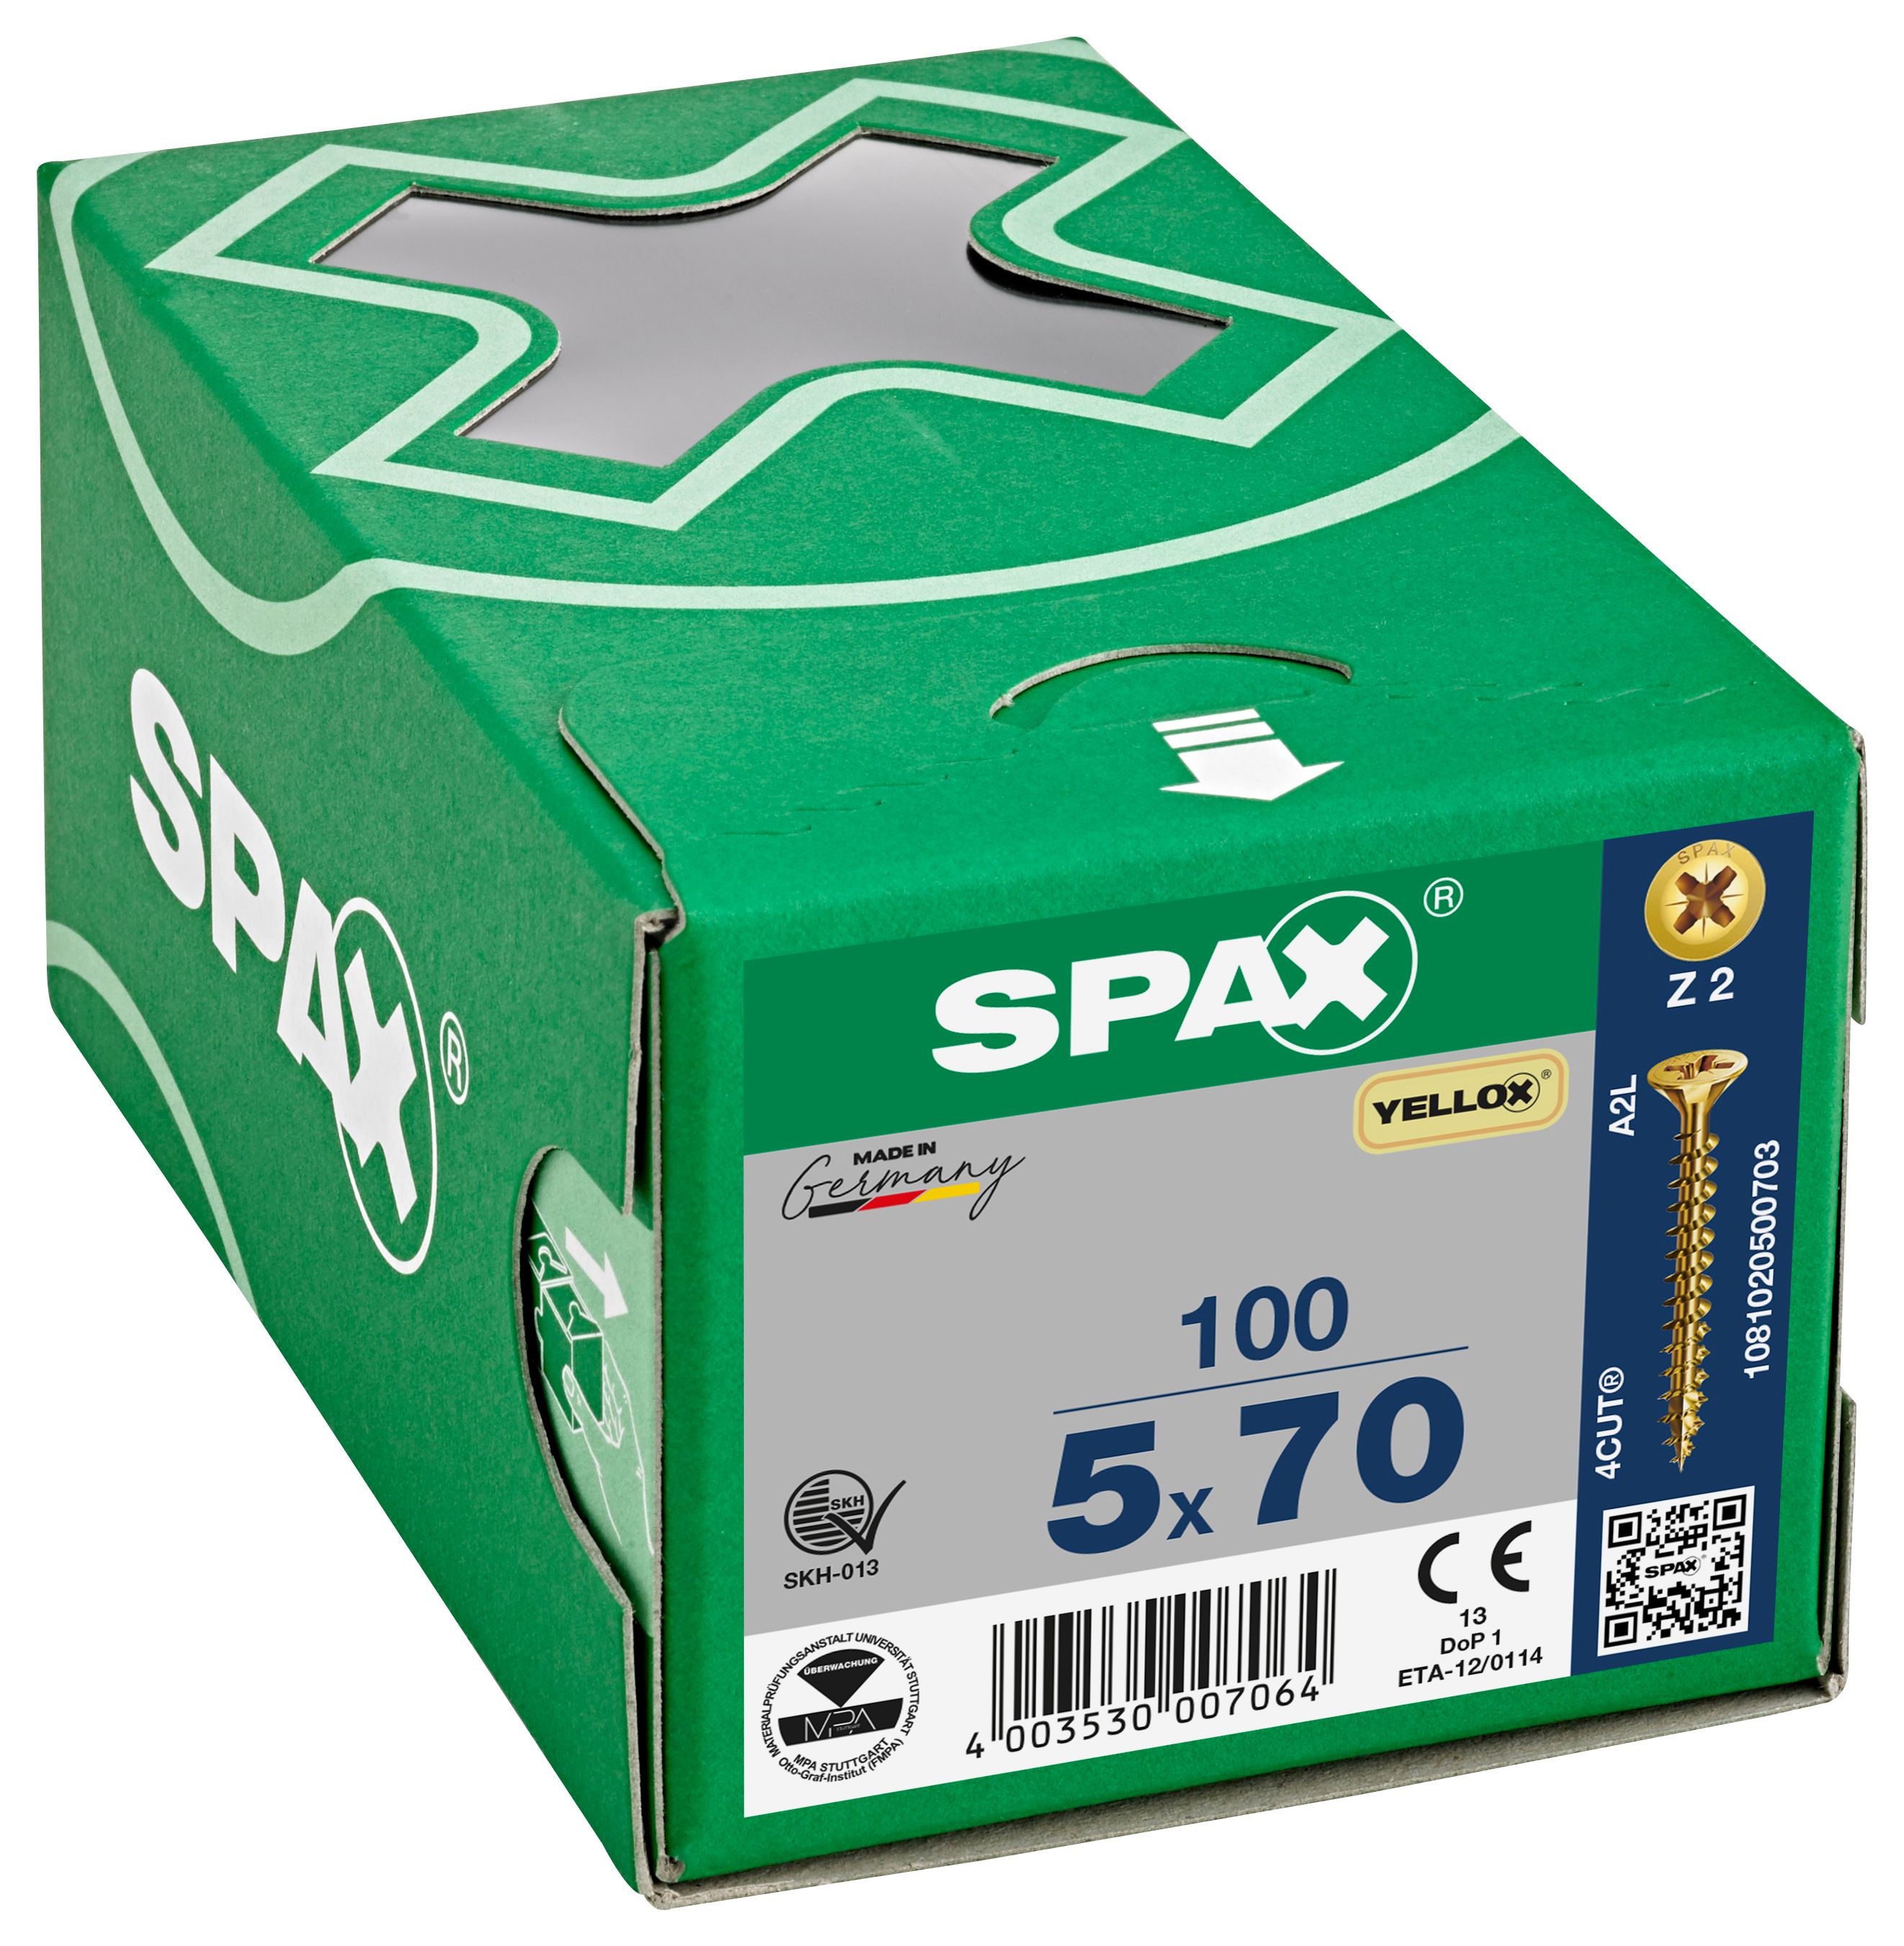 Image of Spax Pz Countersunk Yellox Screws - 5x70mm Pack Of 100